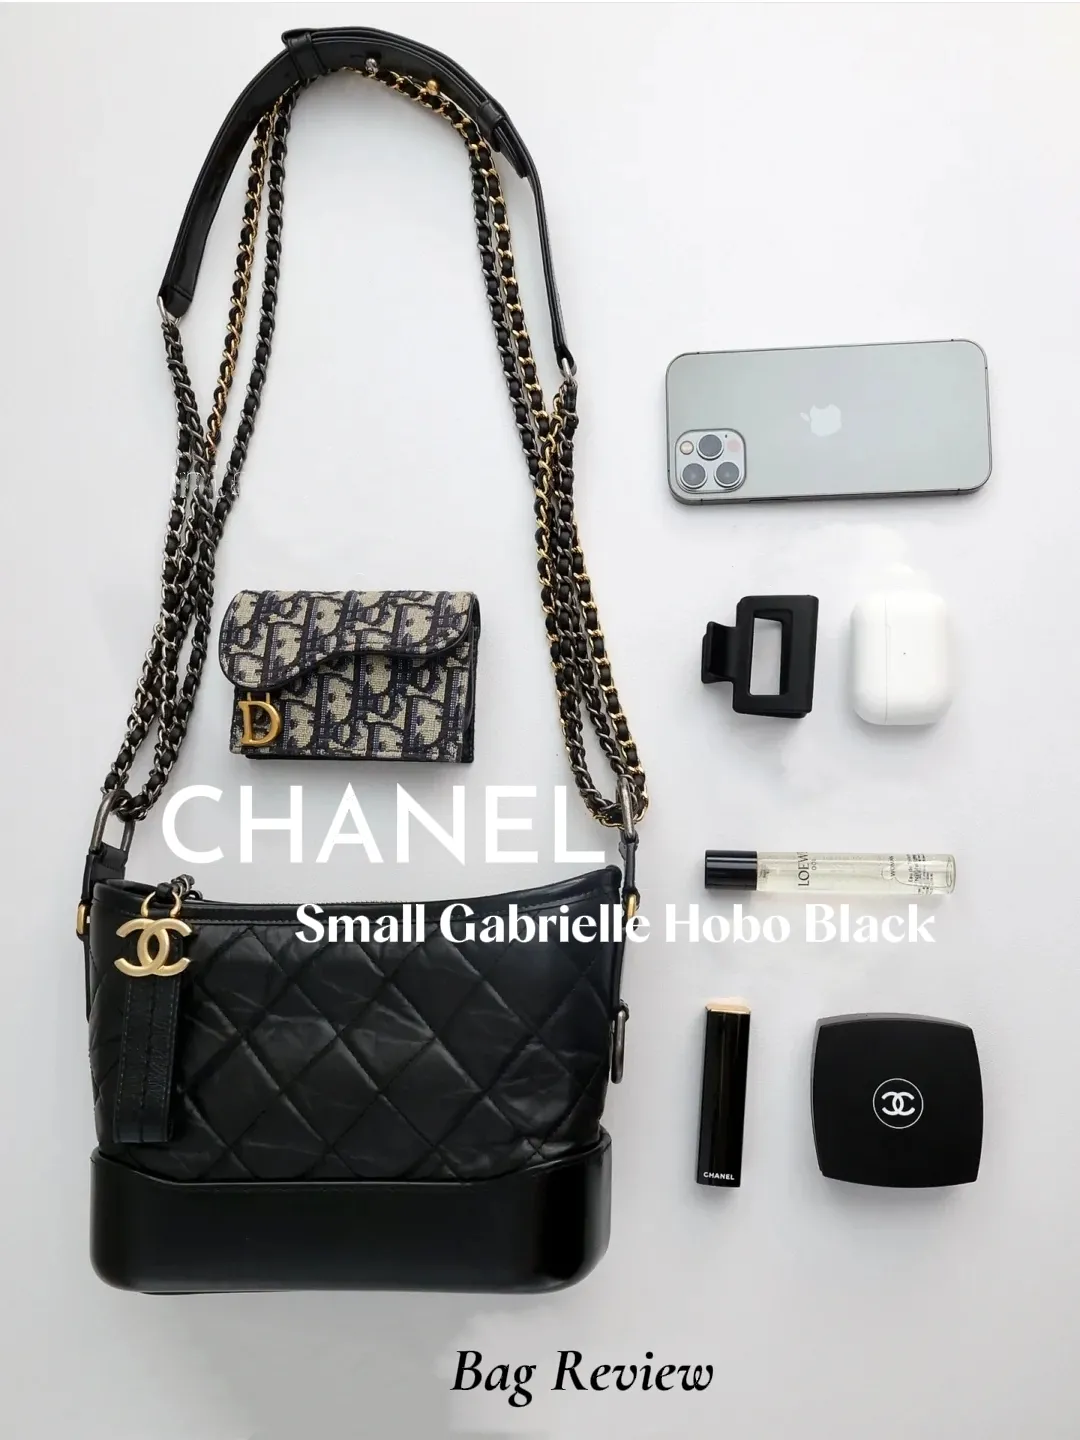 ⚫CHANEL Small Gabrielle Hobo in Black Bag Review👜, Gallery posted by  Angel Moore